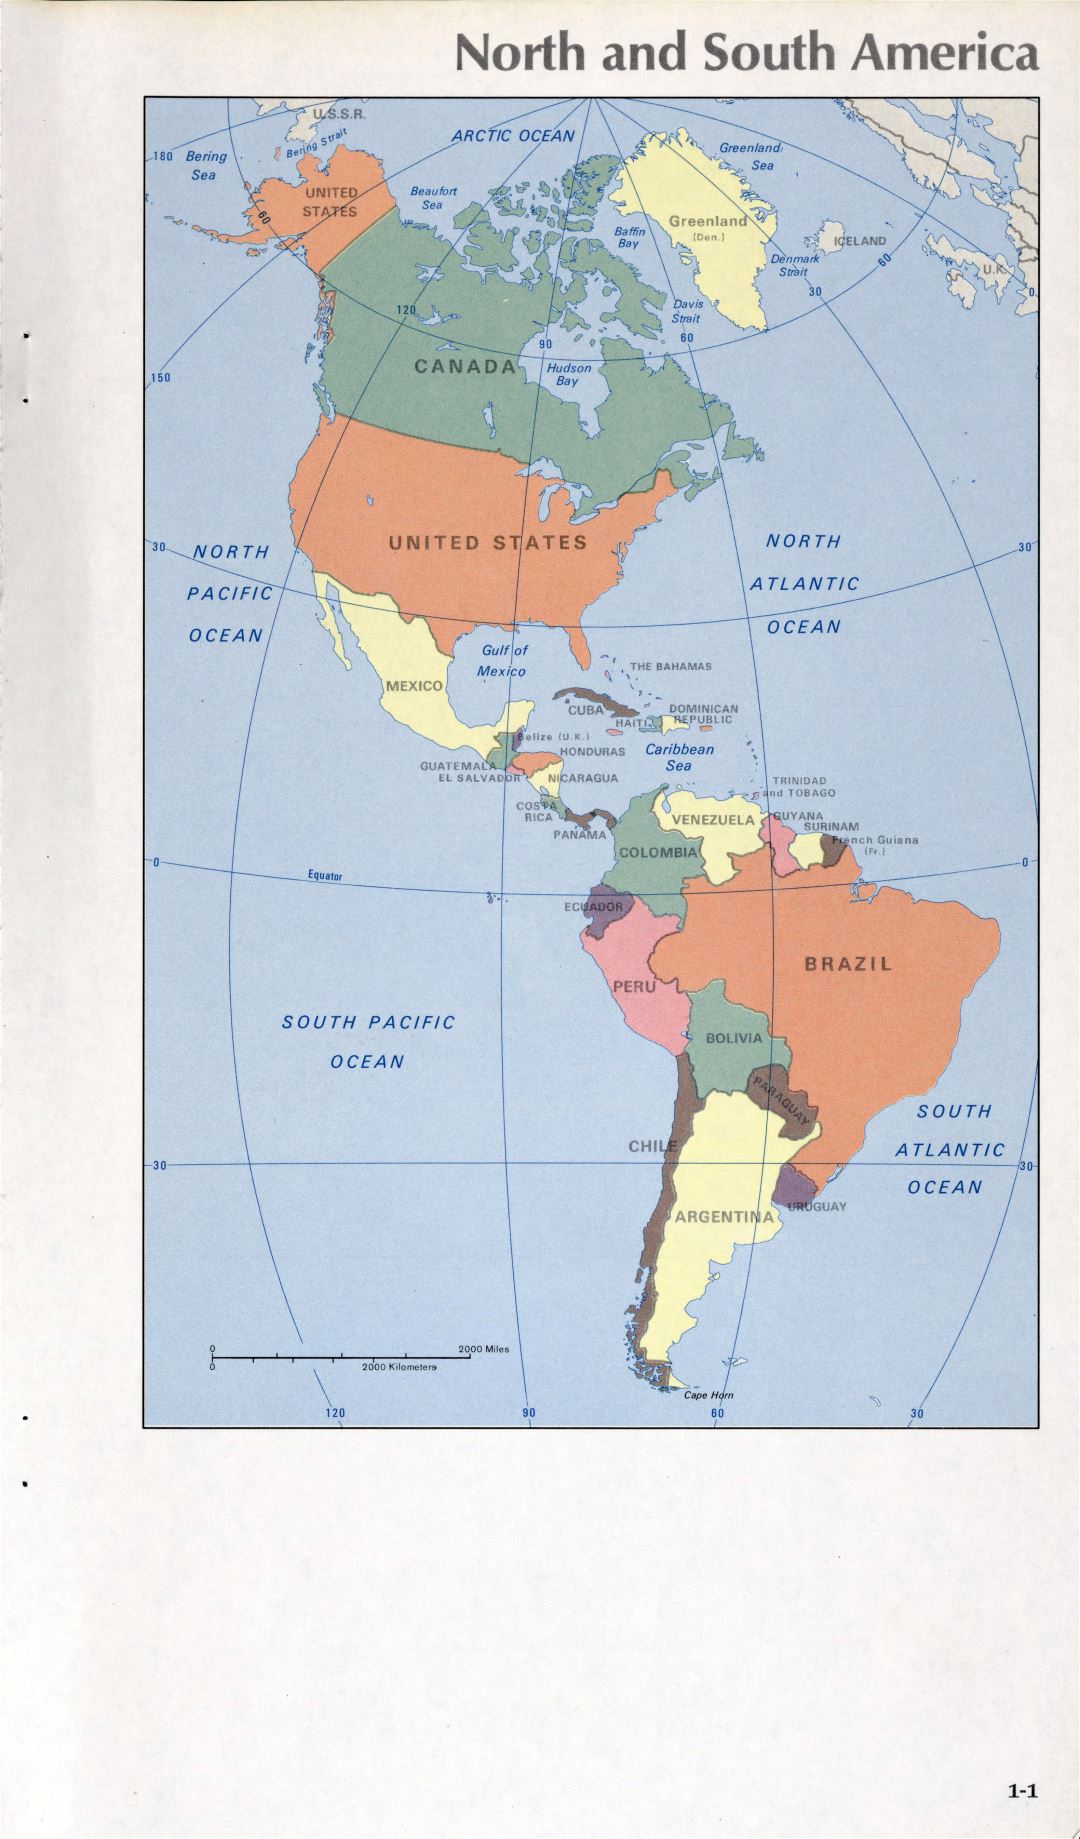 Map of North and South America (1-1)